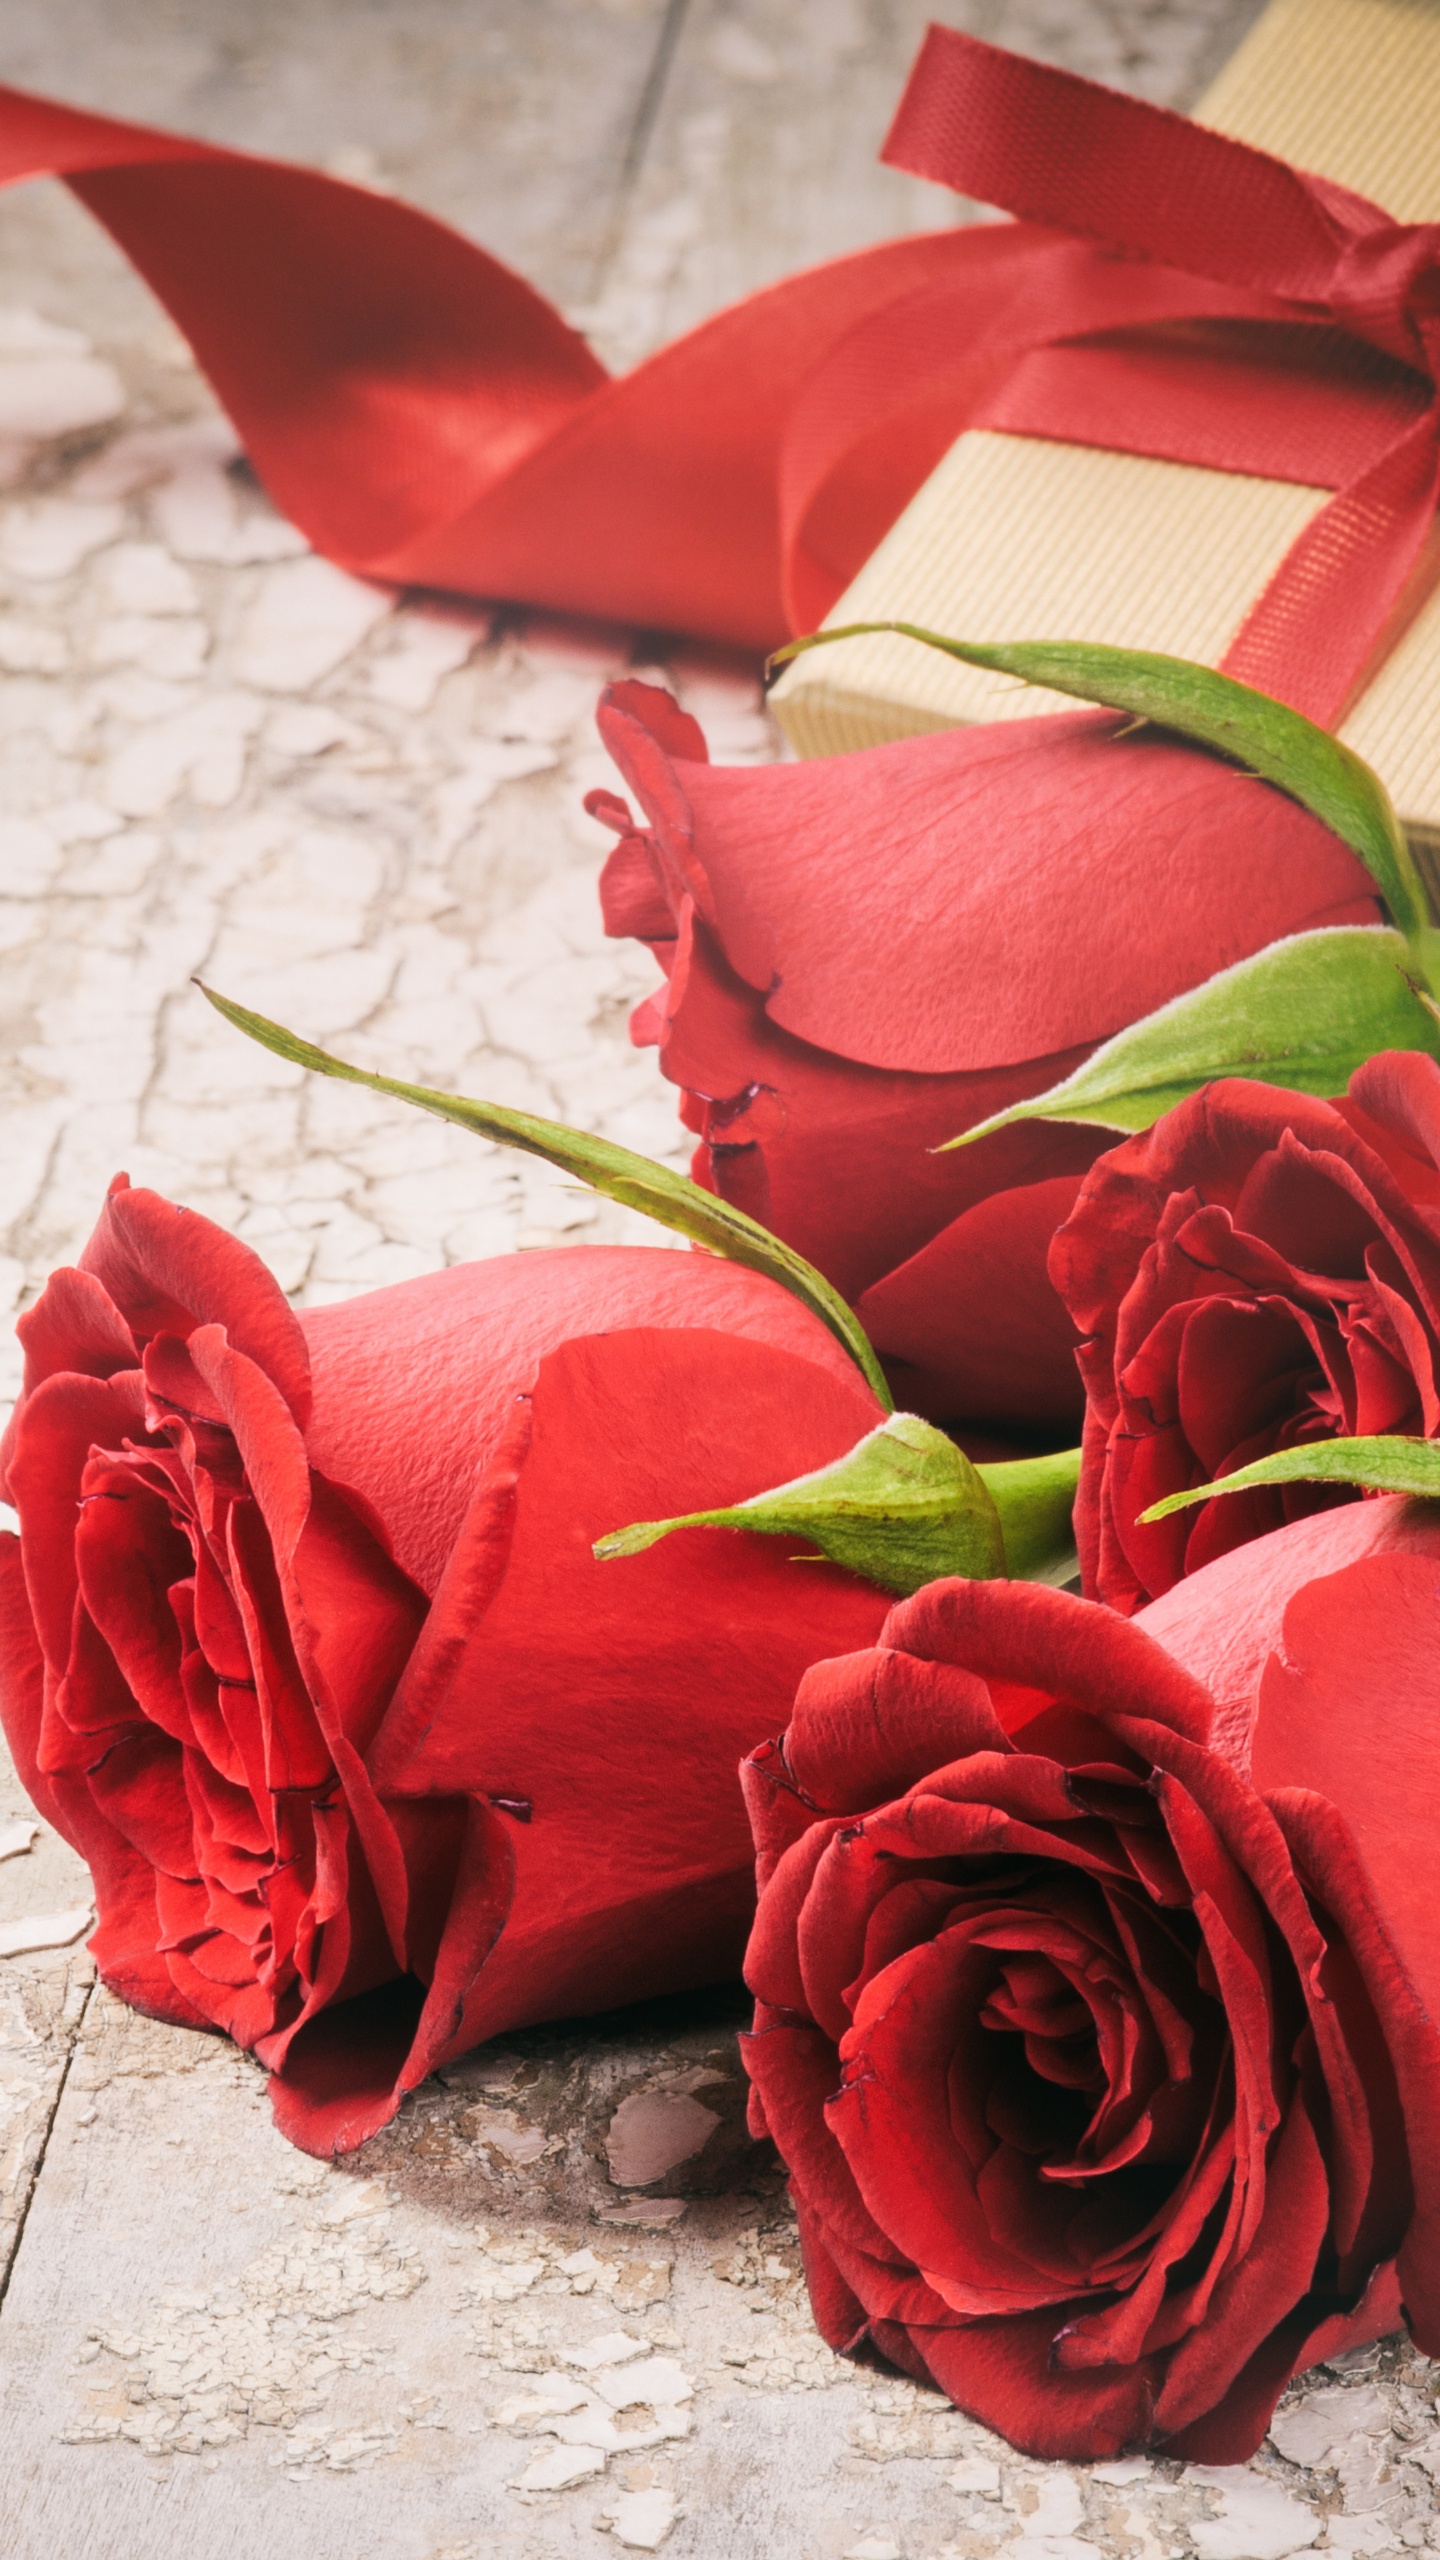 Red Roses on White Textile. Wallpaper in 1440x2560 Resolution